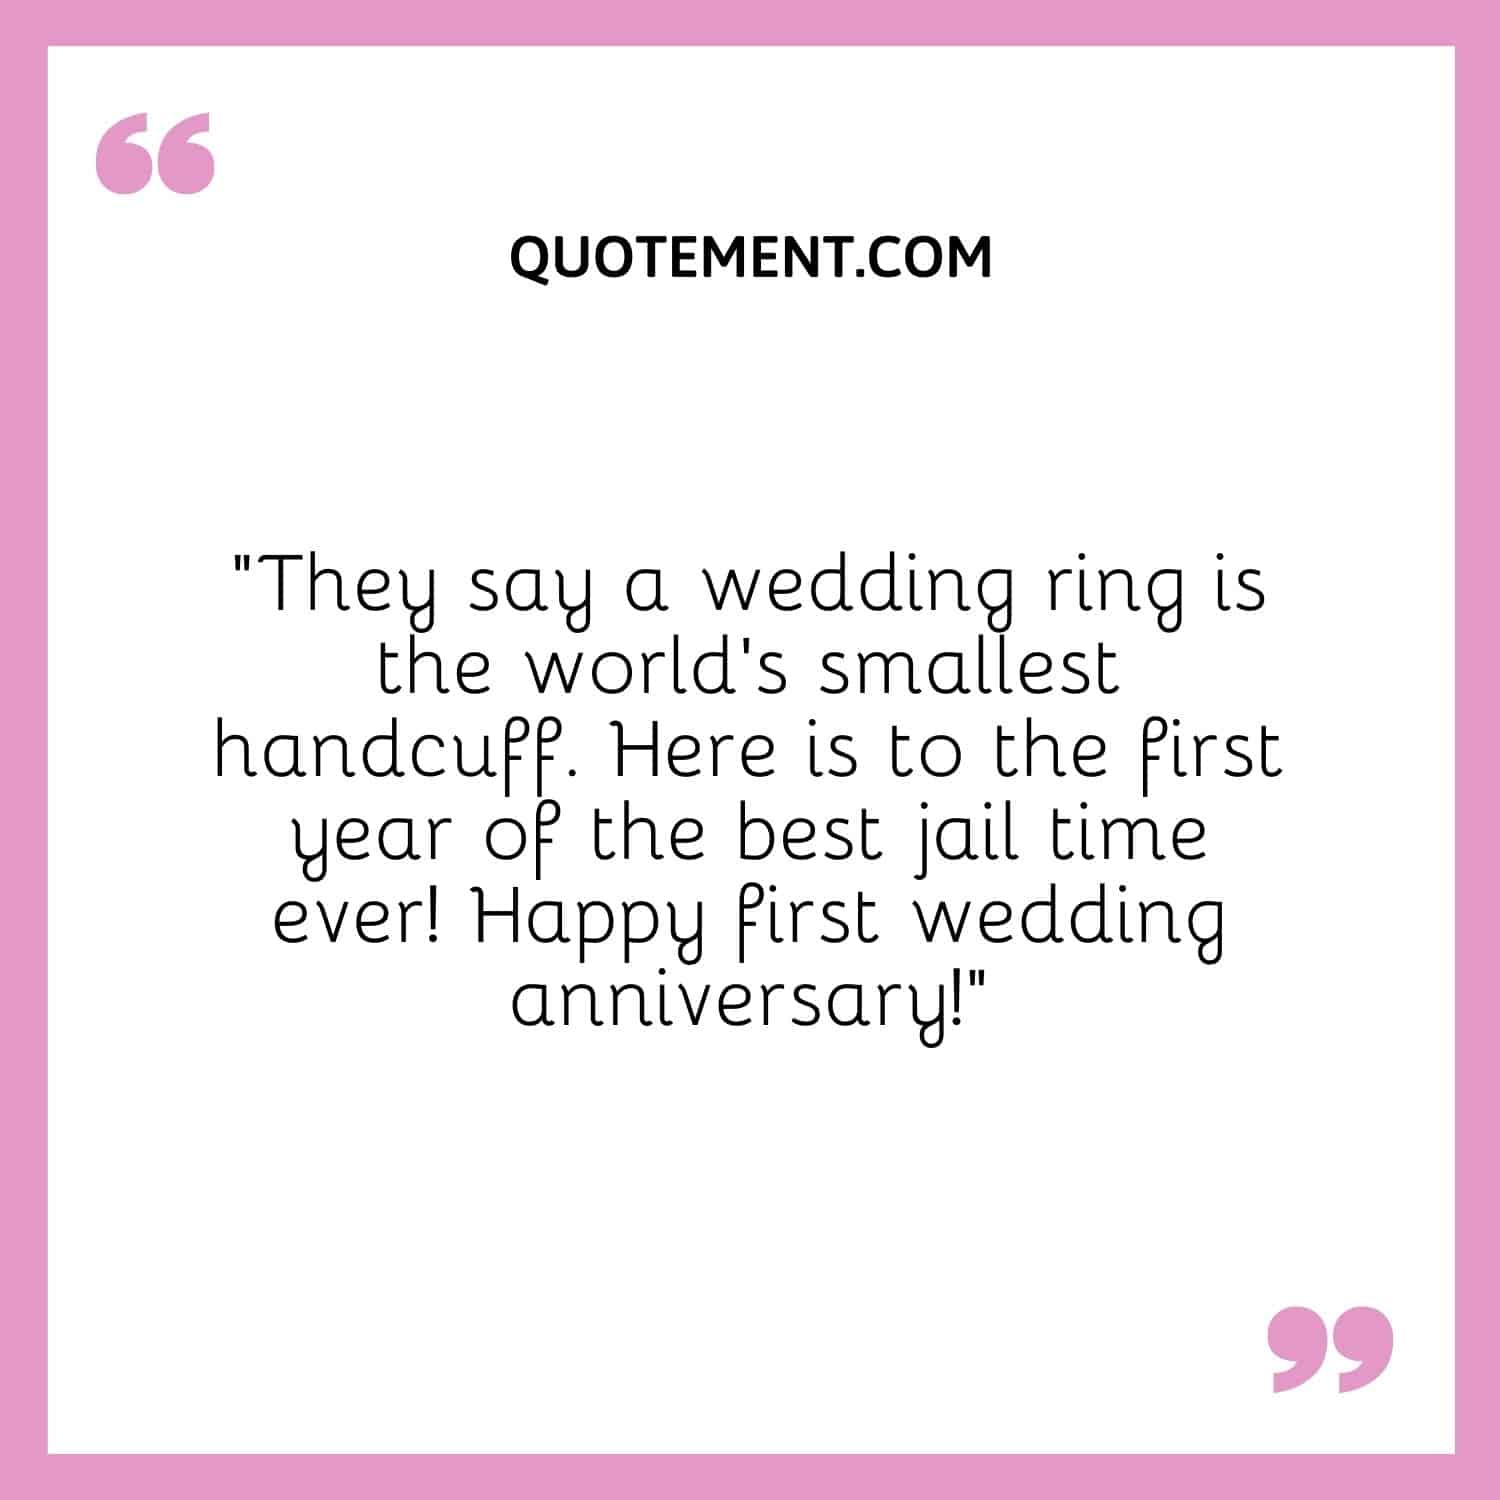 They say a wedding ring is the world’s smallest handcuff